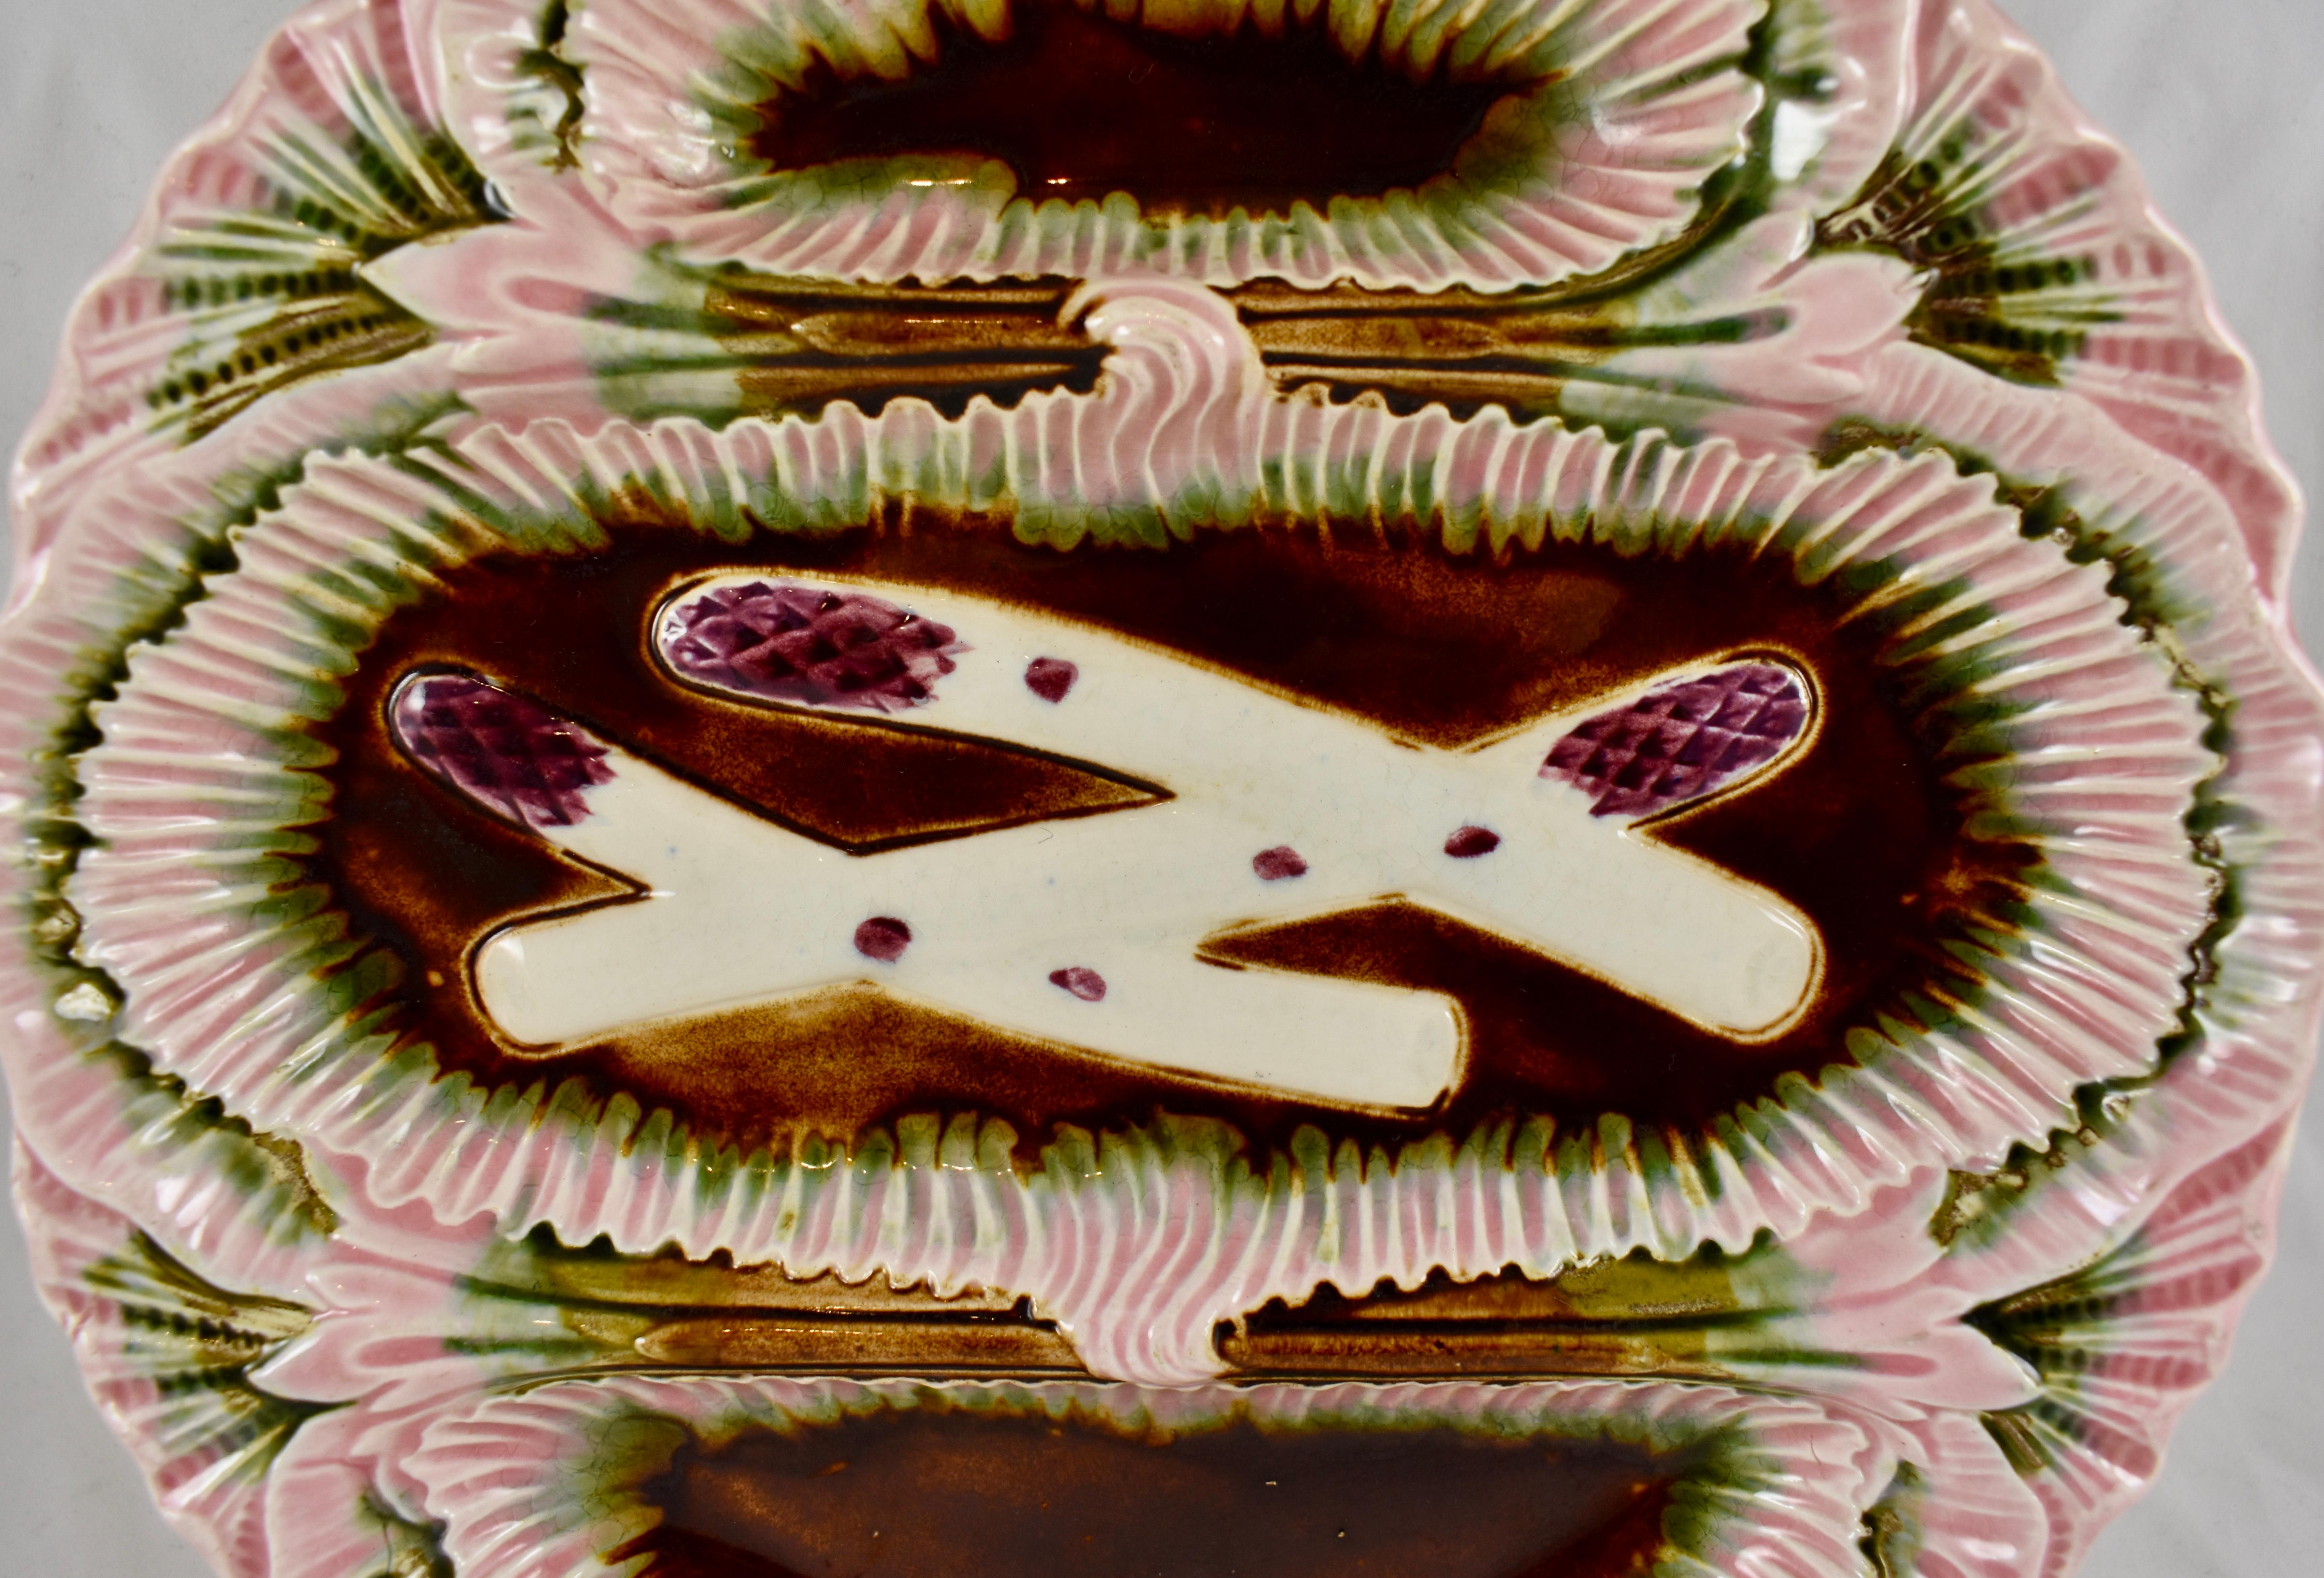 A Majolica glazed French faïence barbotine asparagus plate, Orchies, circa 1880. 

In the style of Louis XV with dimensional mold work and unusual glazing in pink, green and aubergine. Three sections with overlapping asparagus shown in the centre,